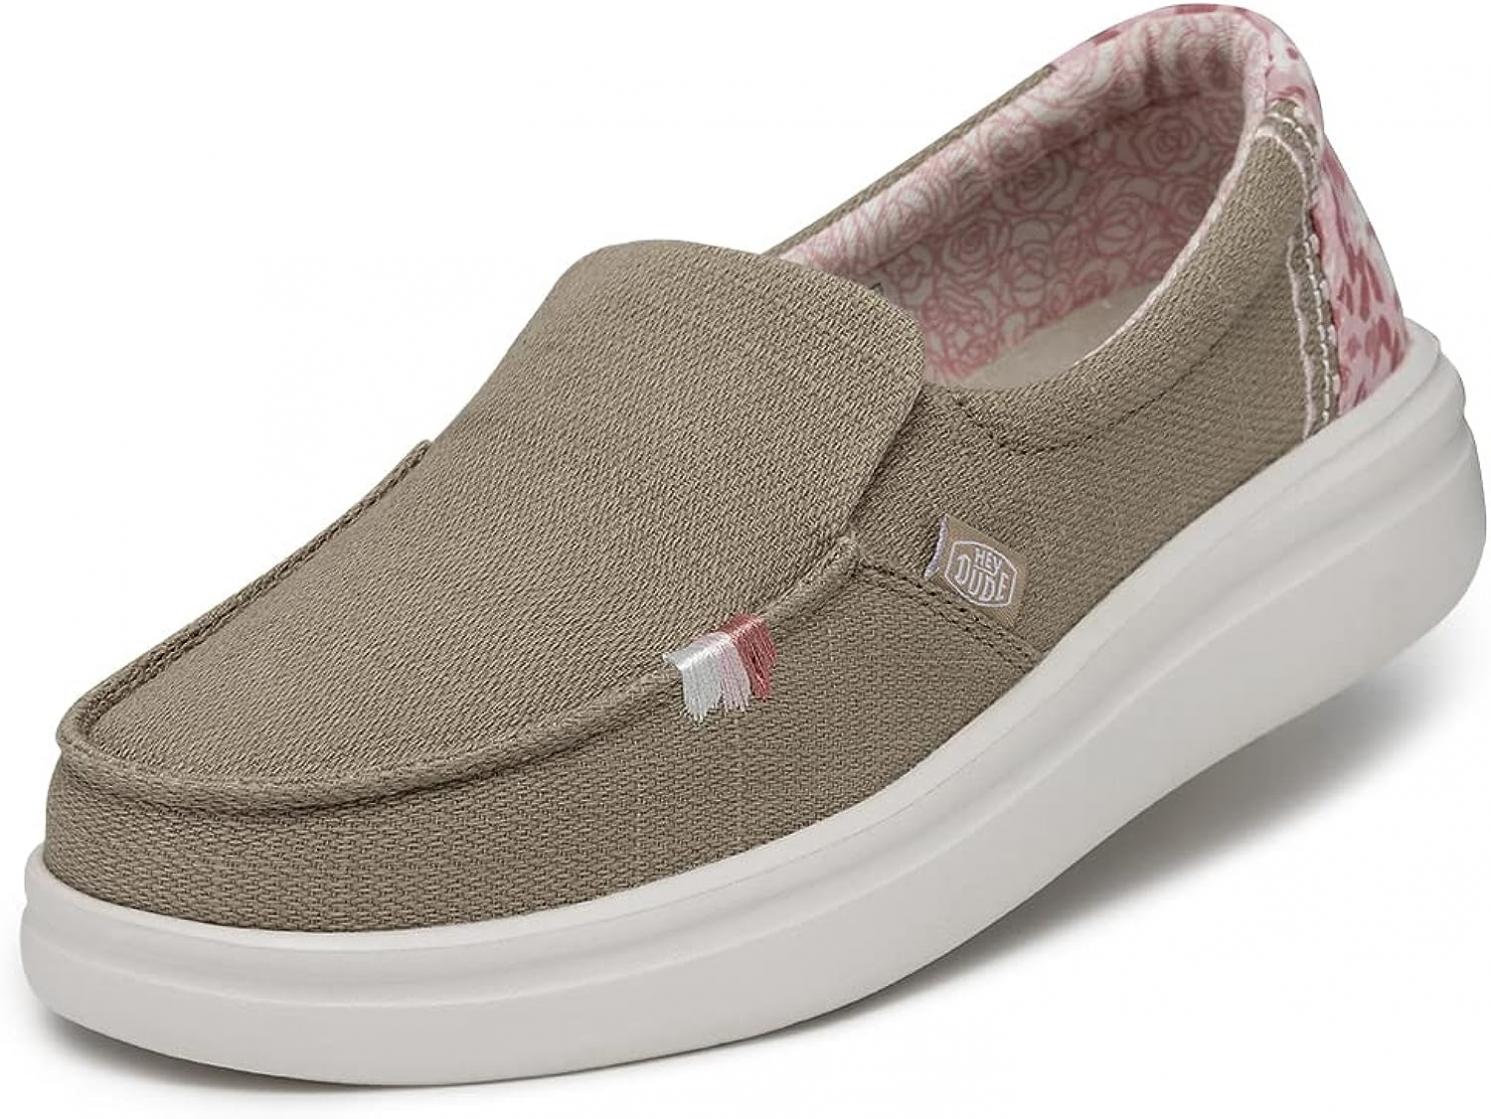 Hey Dude Women's Misty Rise | Women's Shoes | Women's Slip On Shoes | Comfortable & Light-Weight Multi Colors and Sizes